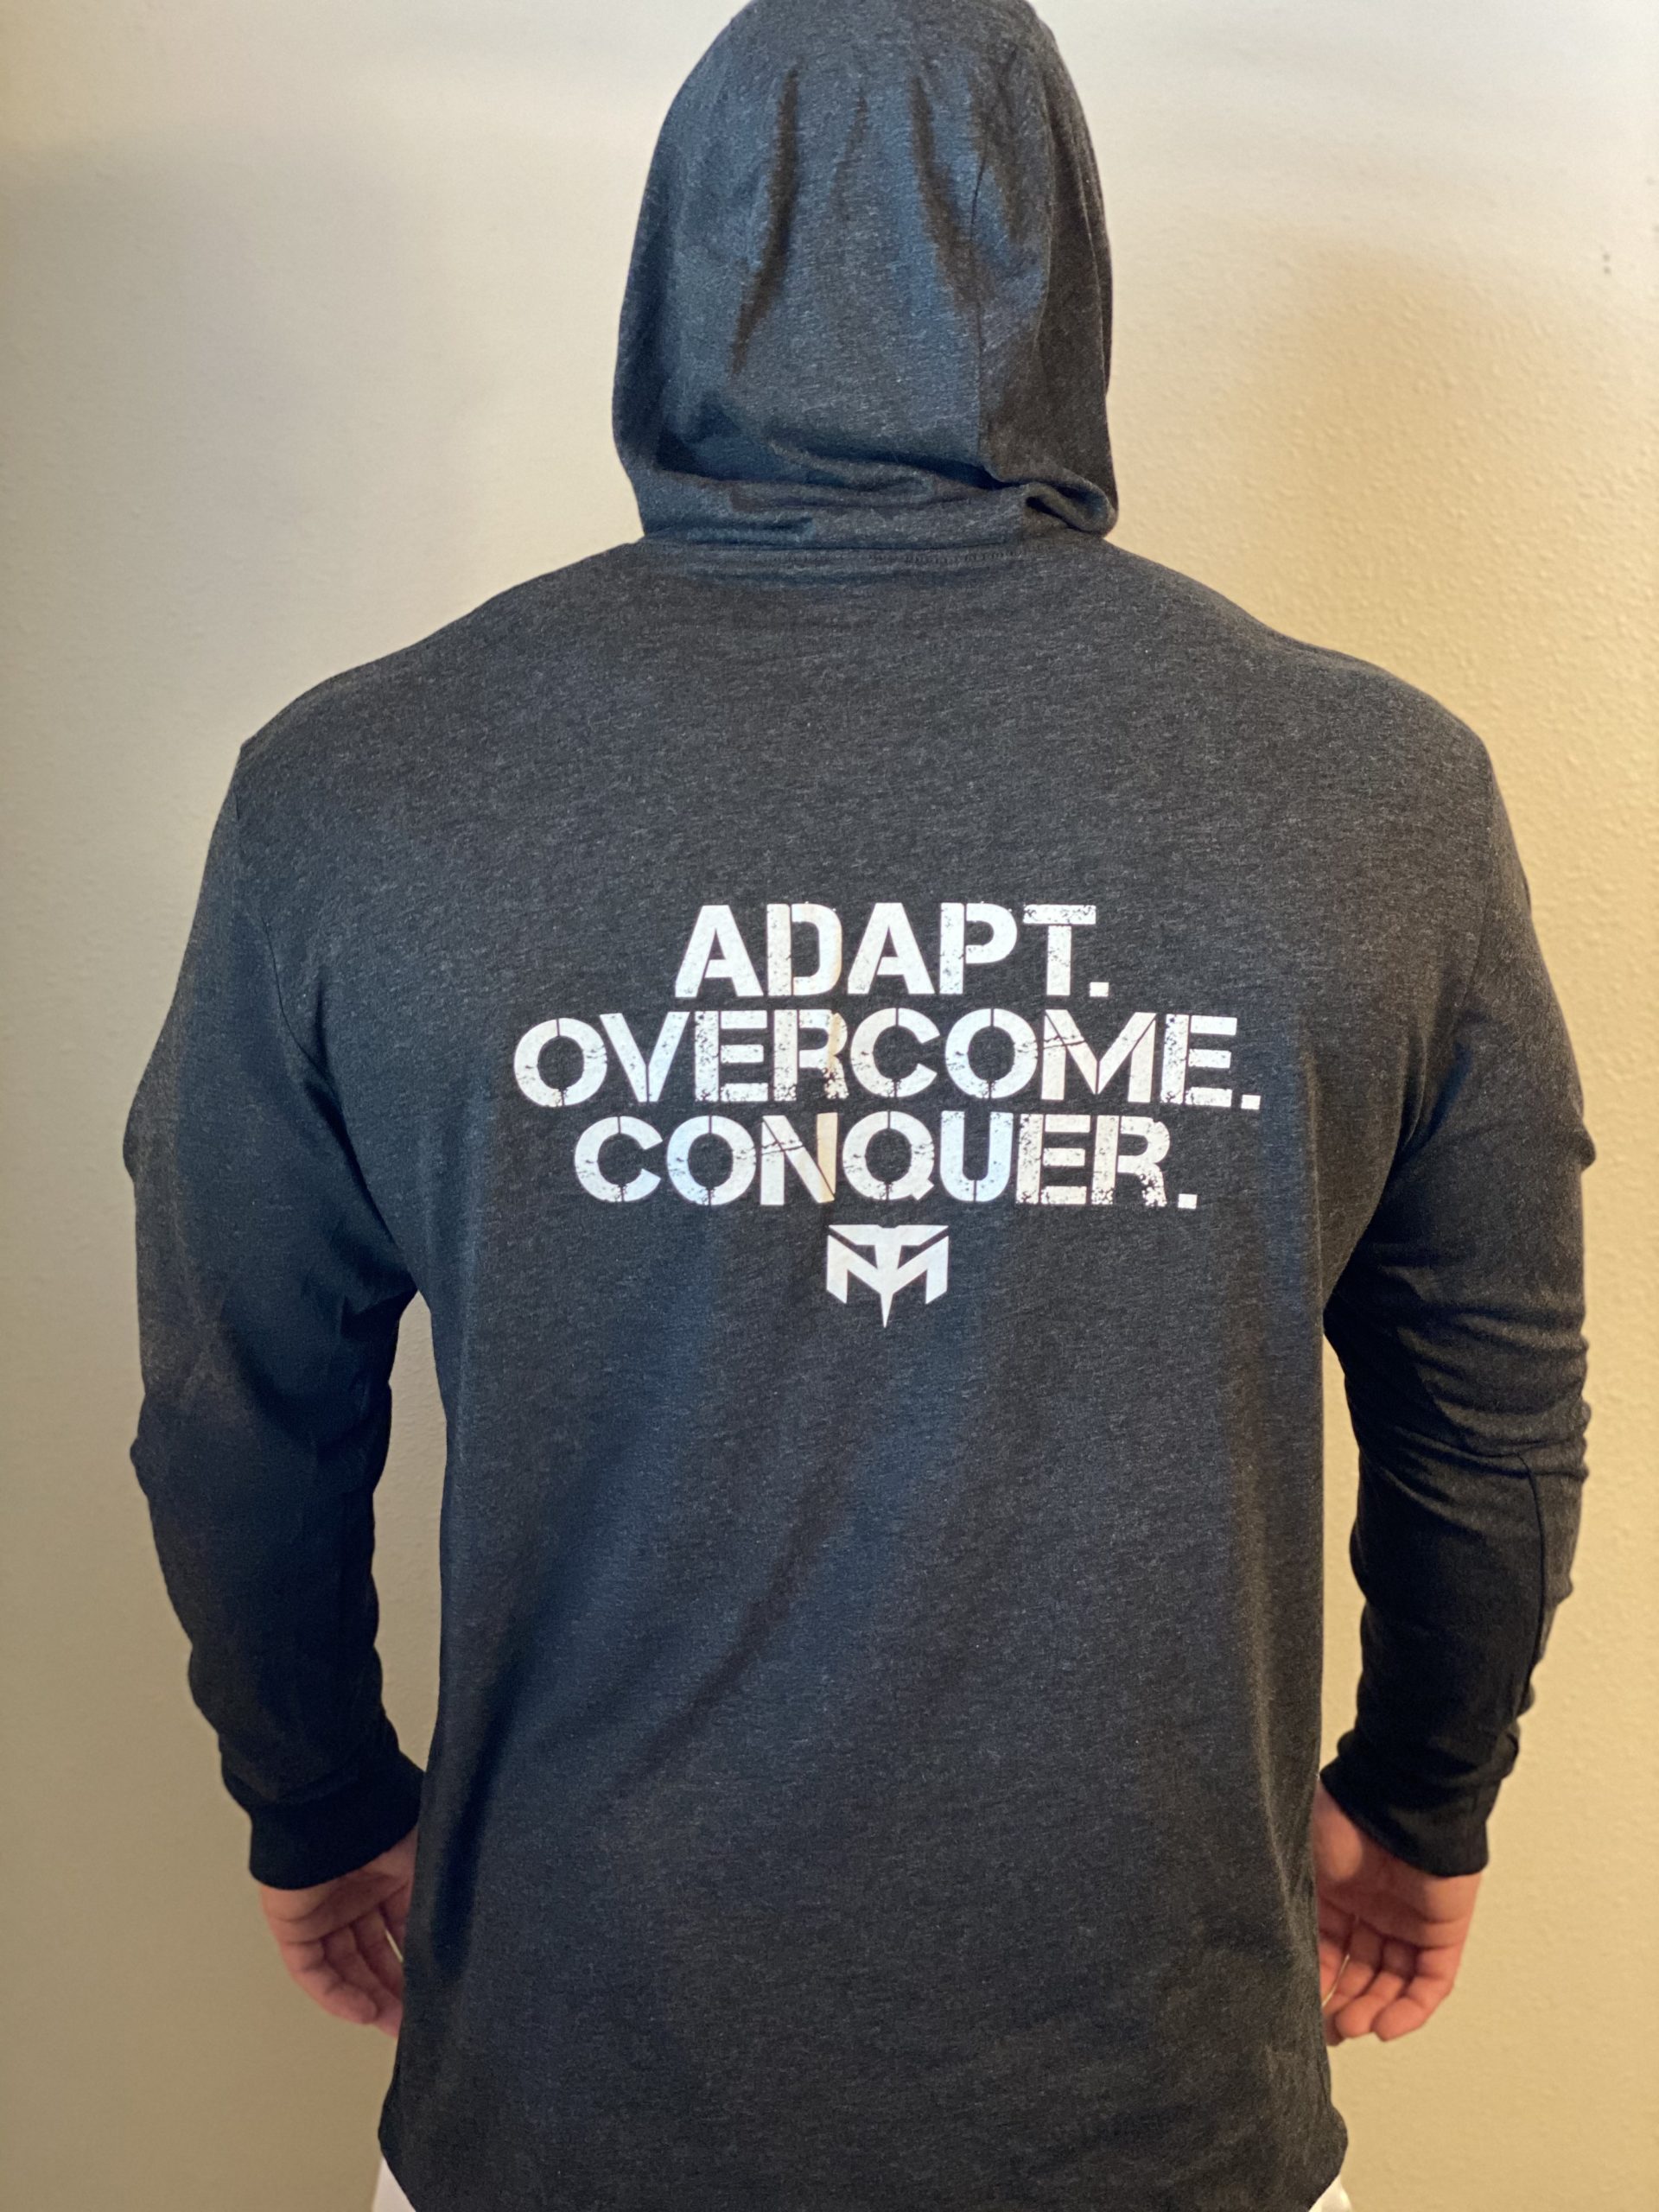 Black Vintage Adapt. Overcome. Conquer. Hoodie